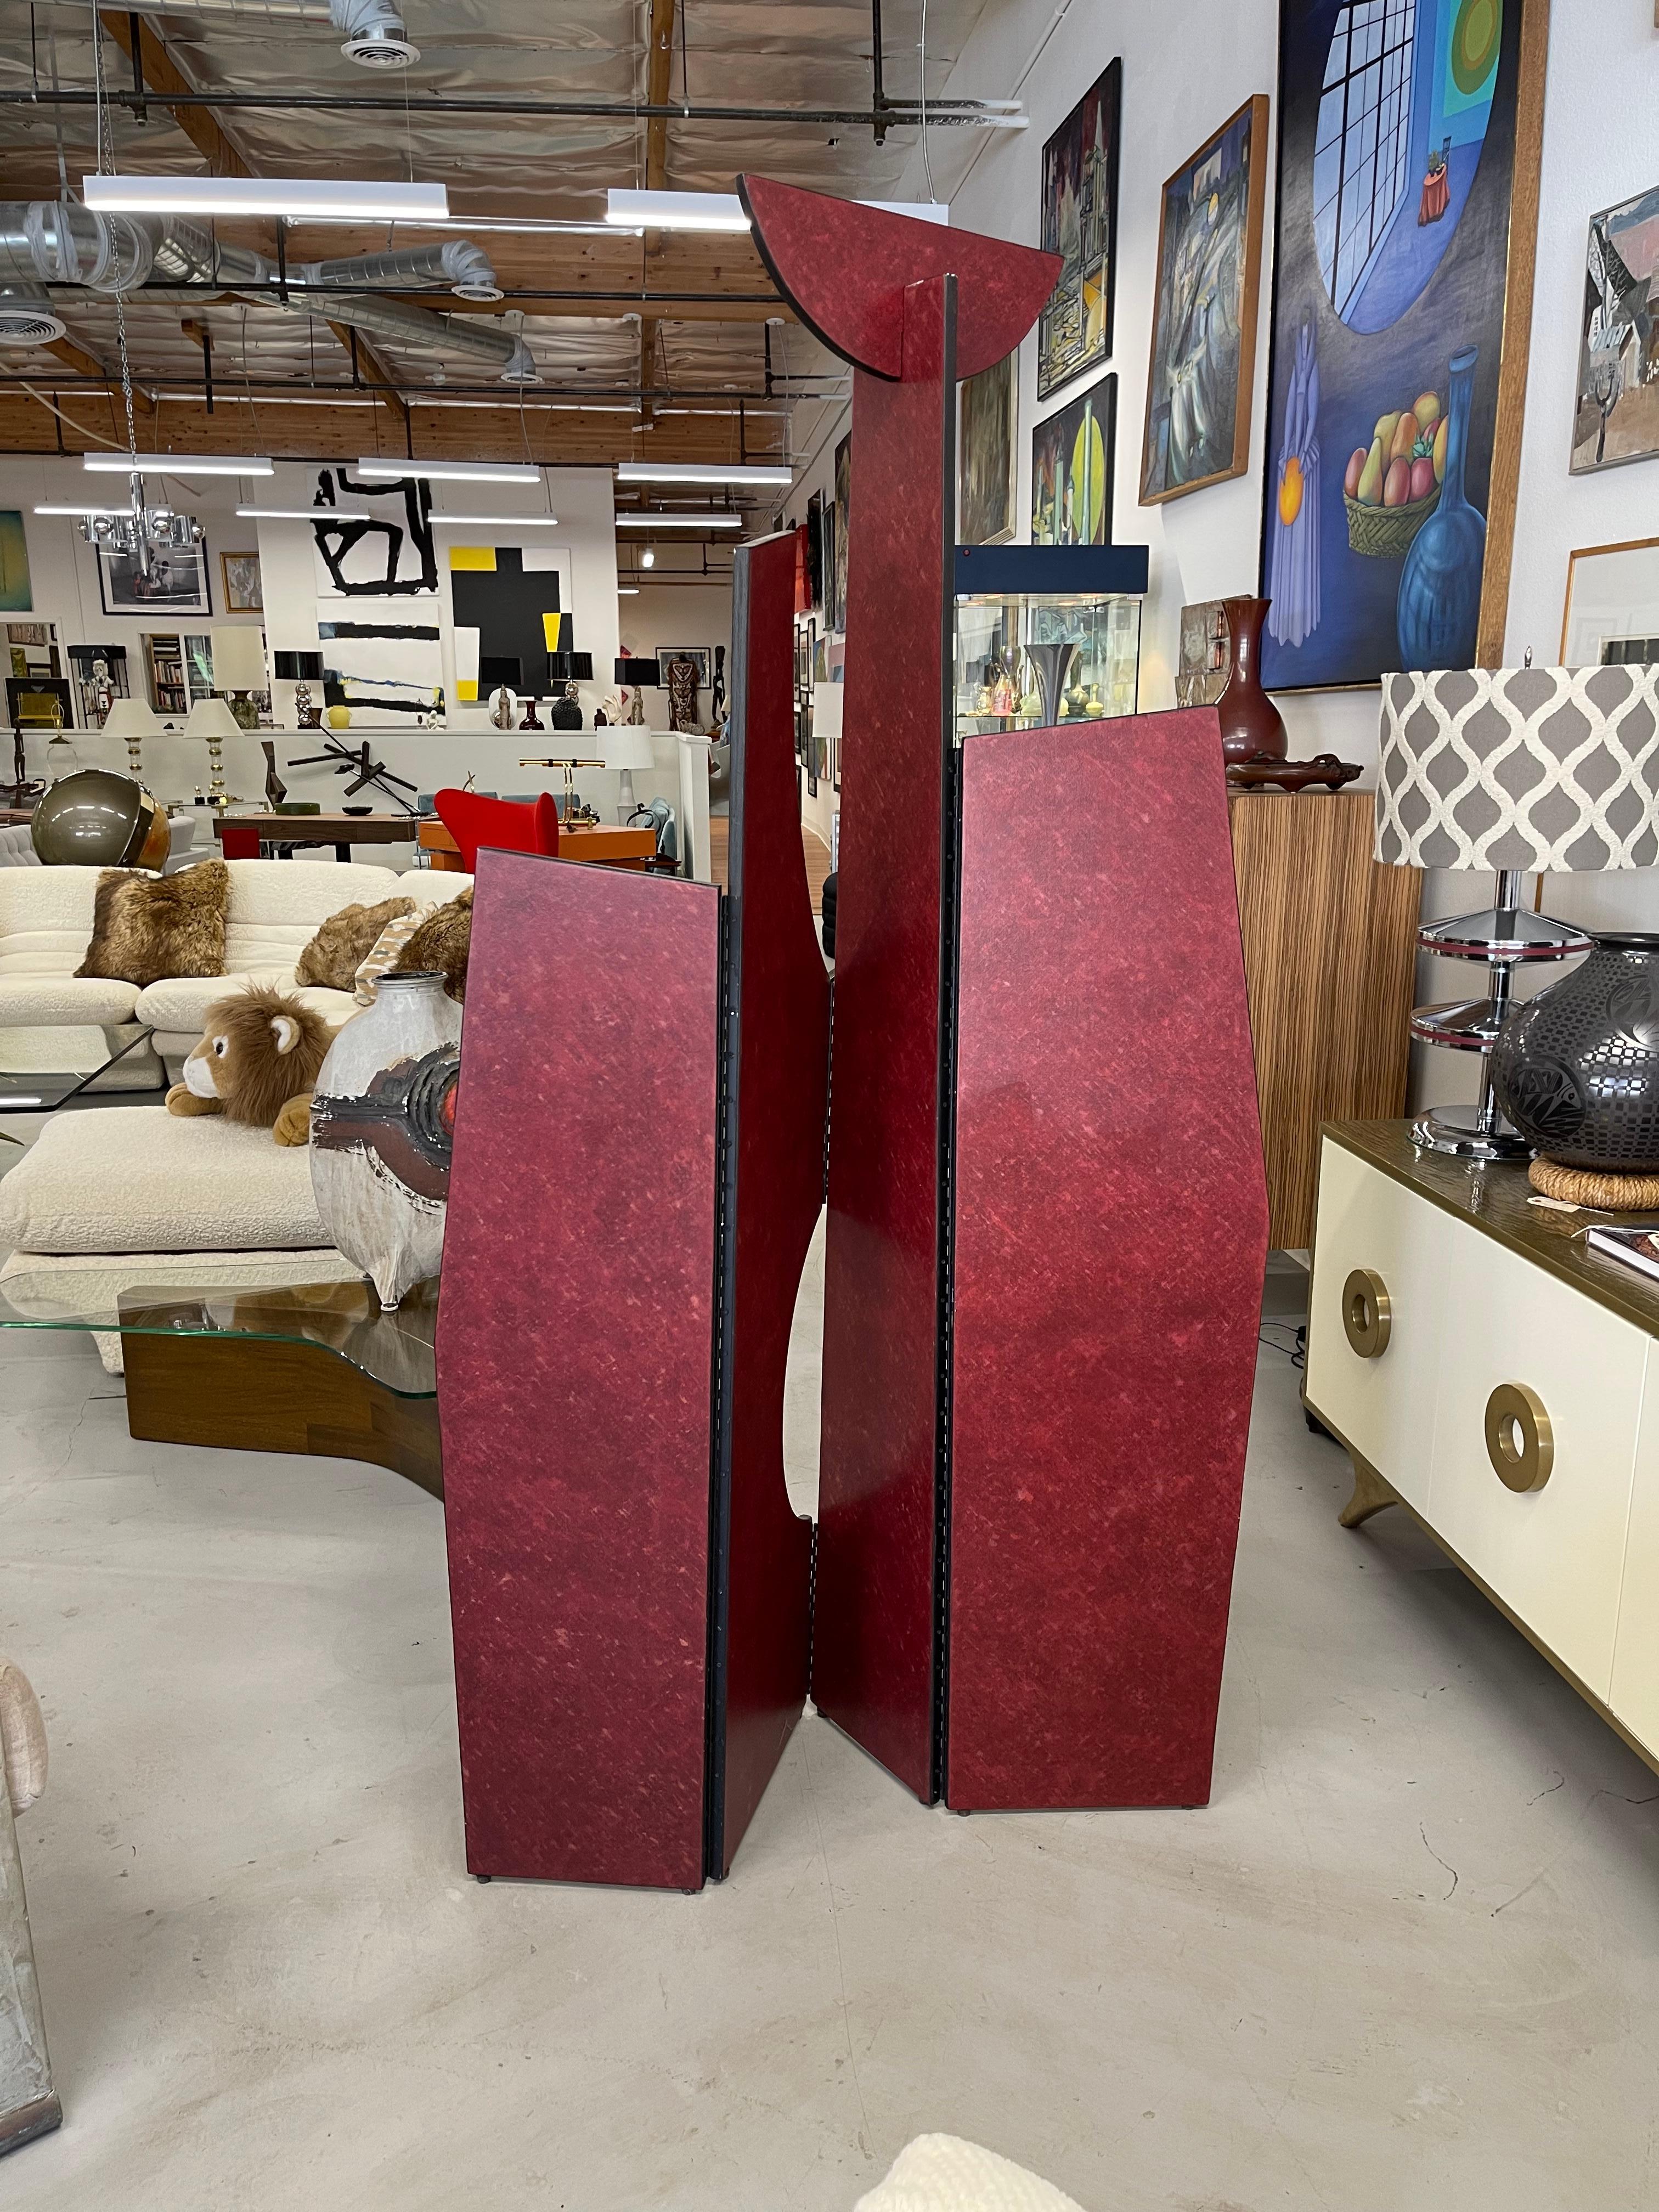 Wonderfully shaped room divider screen. Painted a rich shade of burgundy. !980’s vintage. Approximately 78 inches tall. The sections are different widths, 14, 9 16 and 12 inches wide. If spread flat, approximately 51 inches wide. In good condition